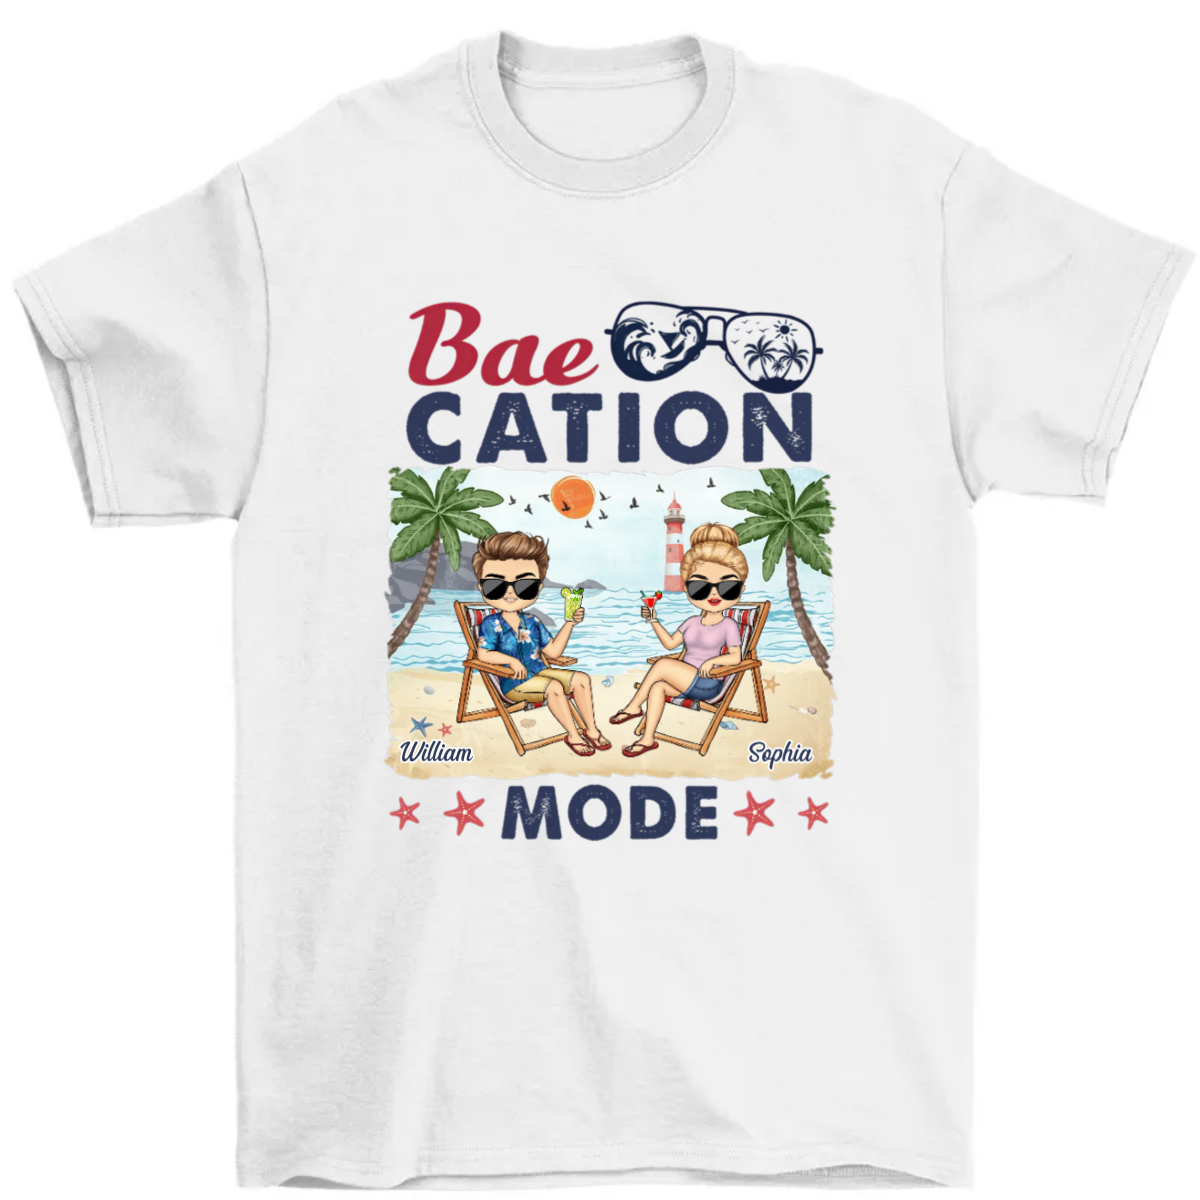 Baecation Mode - Personalized T Shirt